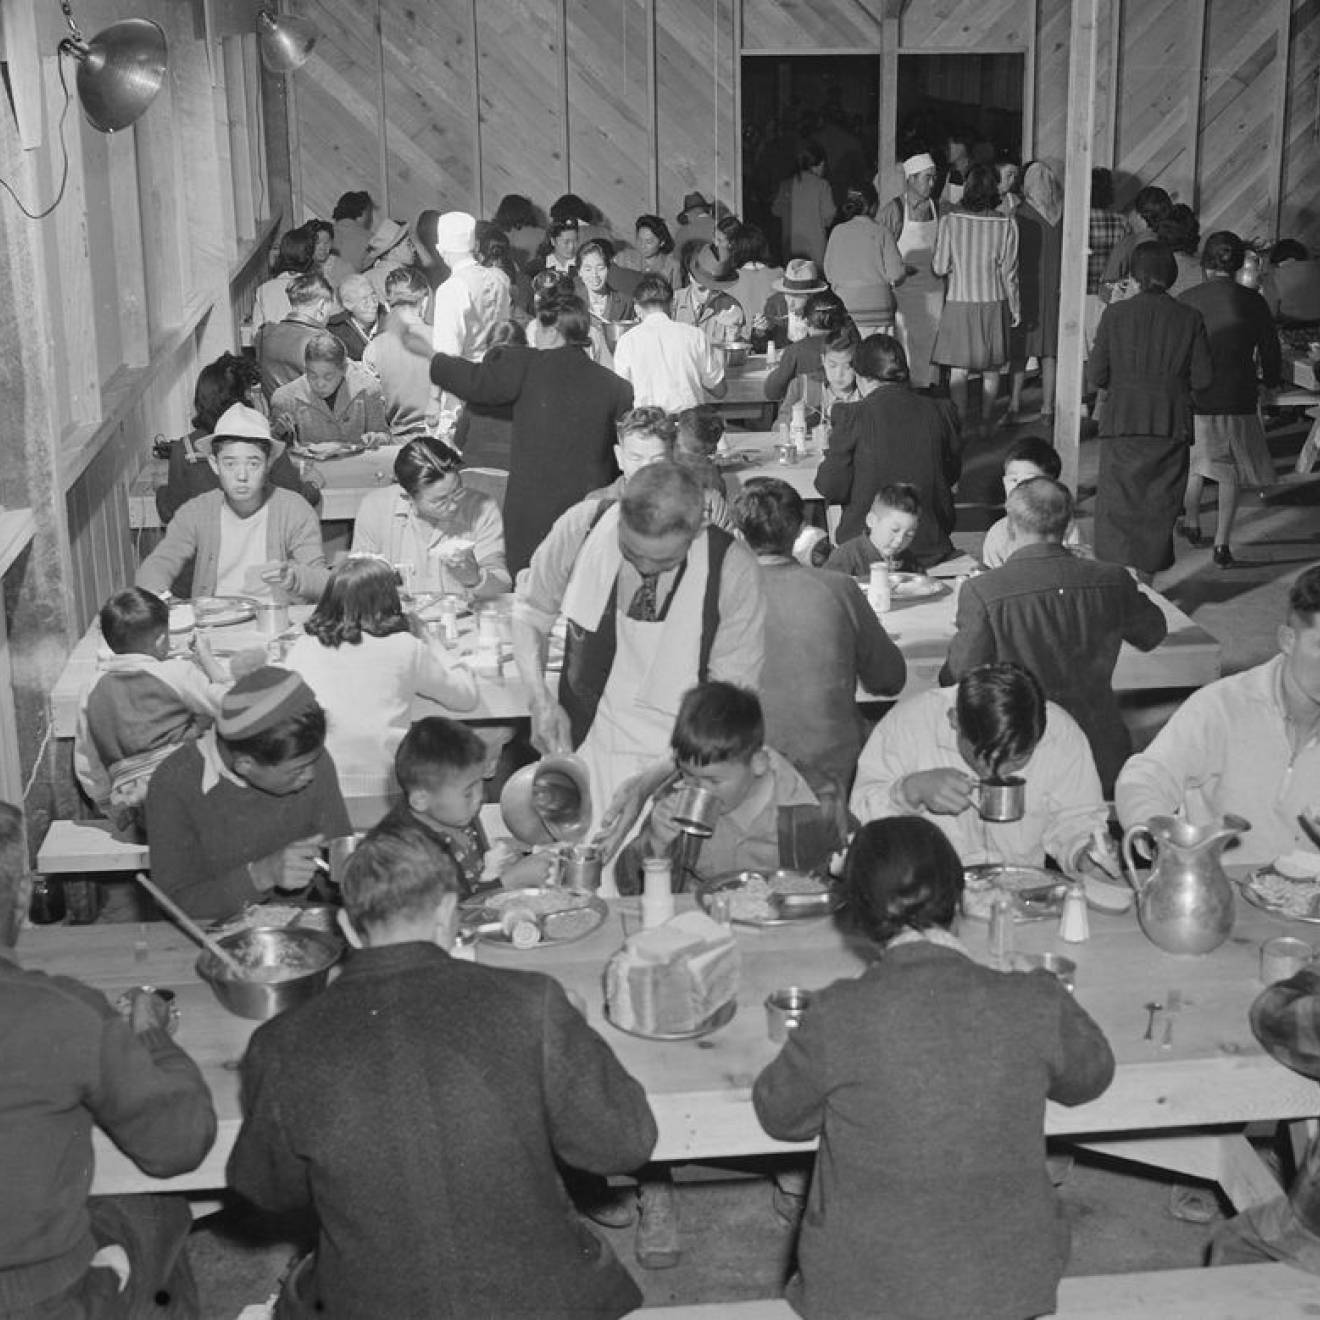 Meal time at the Manzanar Relocation Center